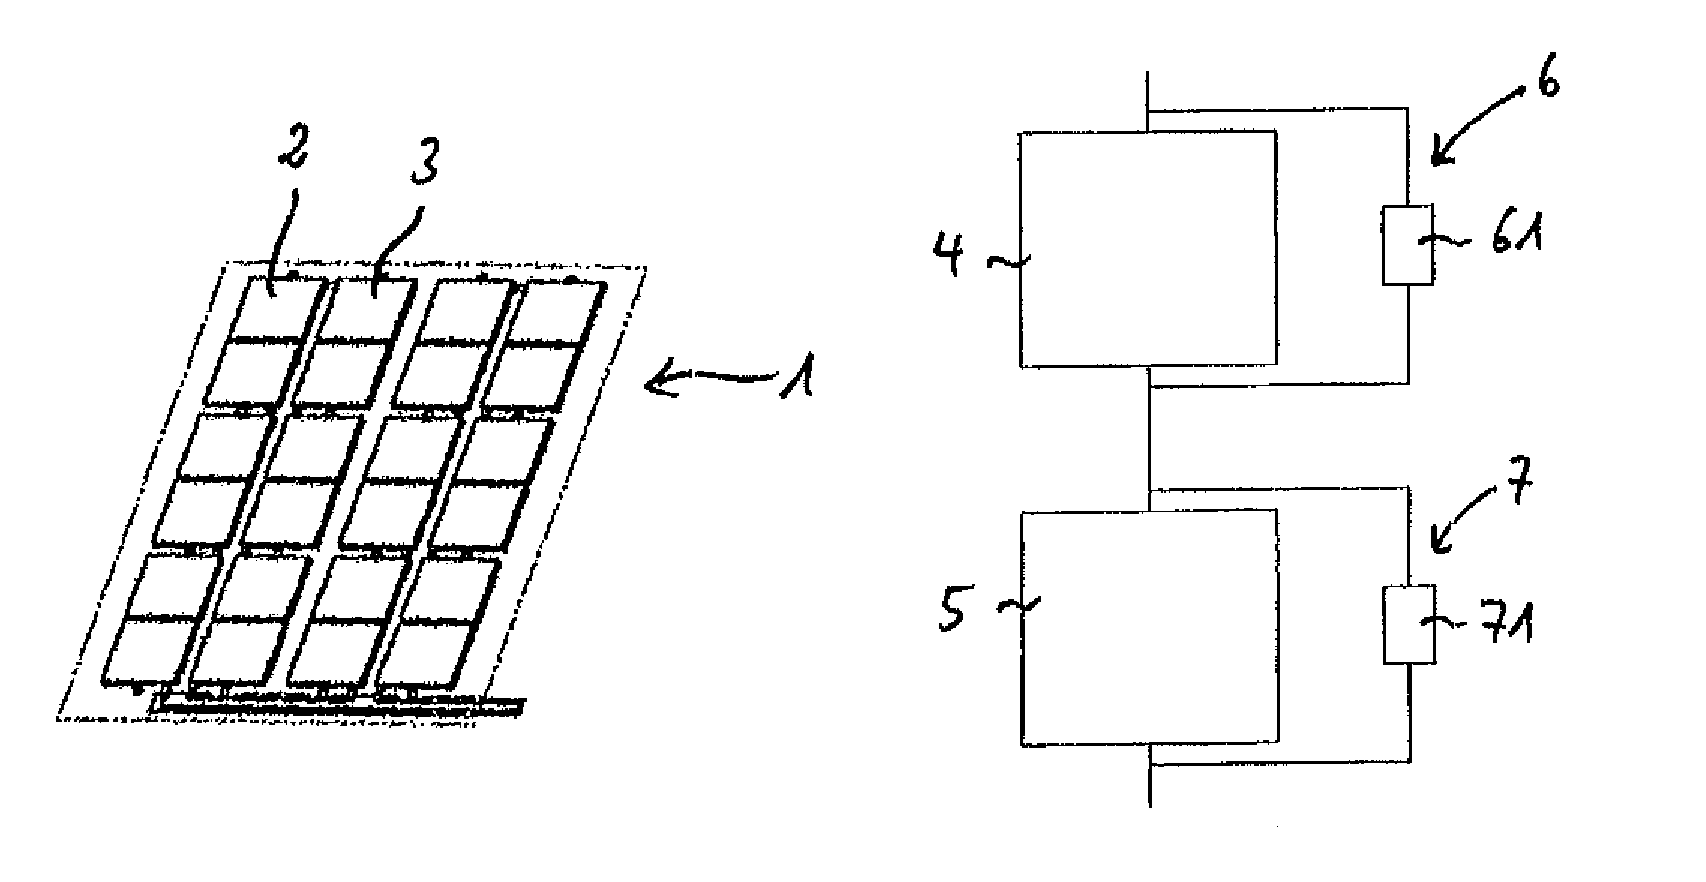 Heating apparatus having at least two thermoelectric modules which are connected in series